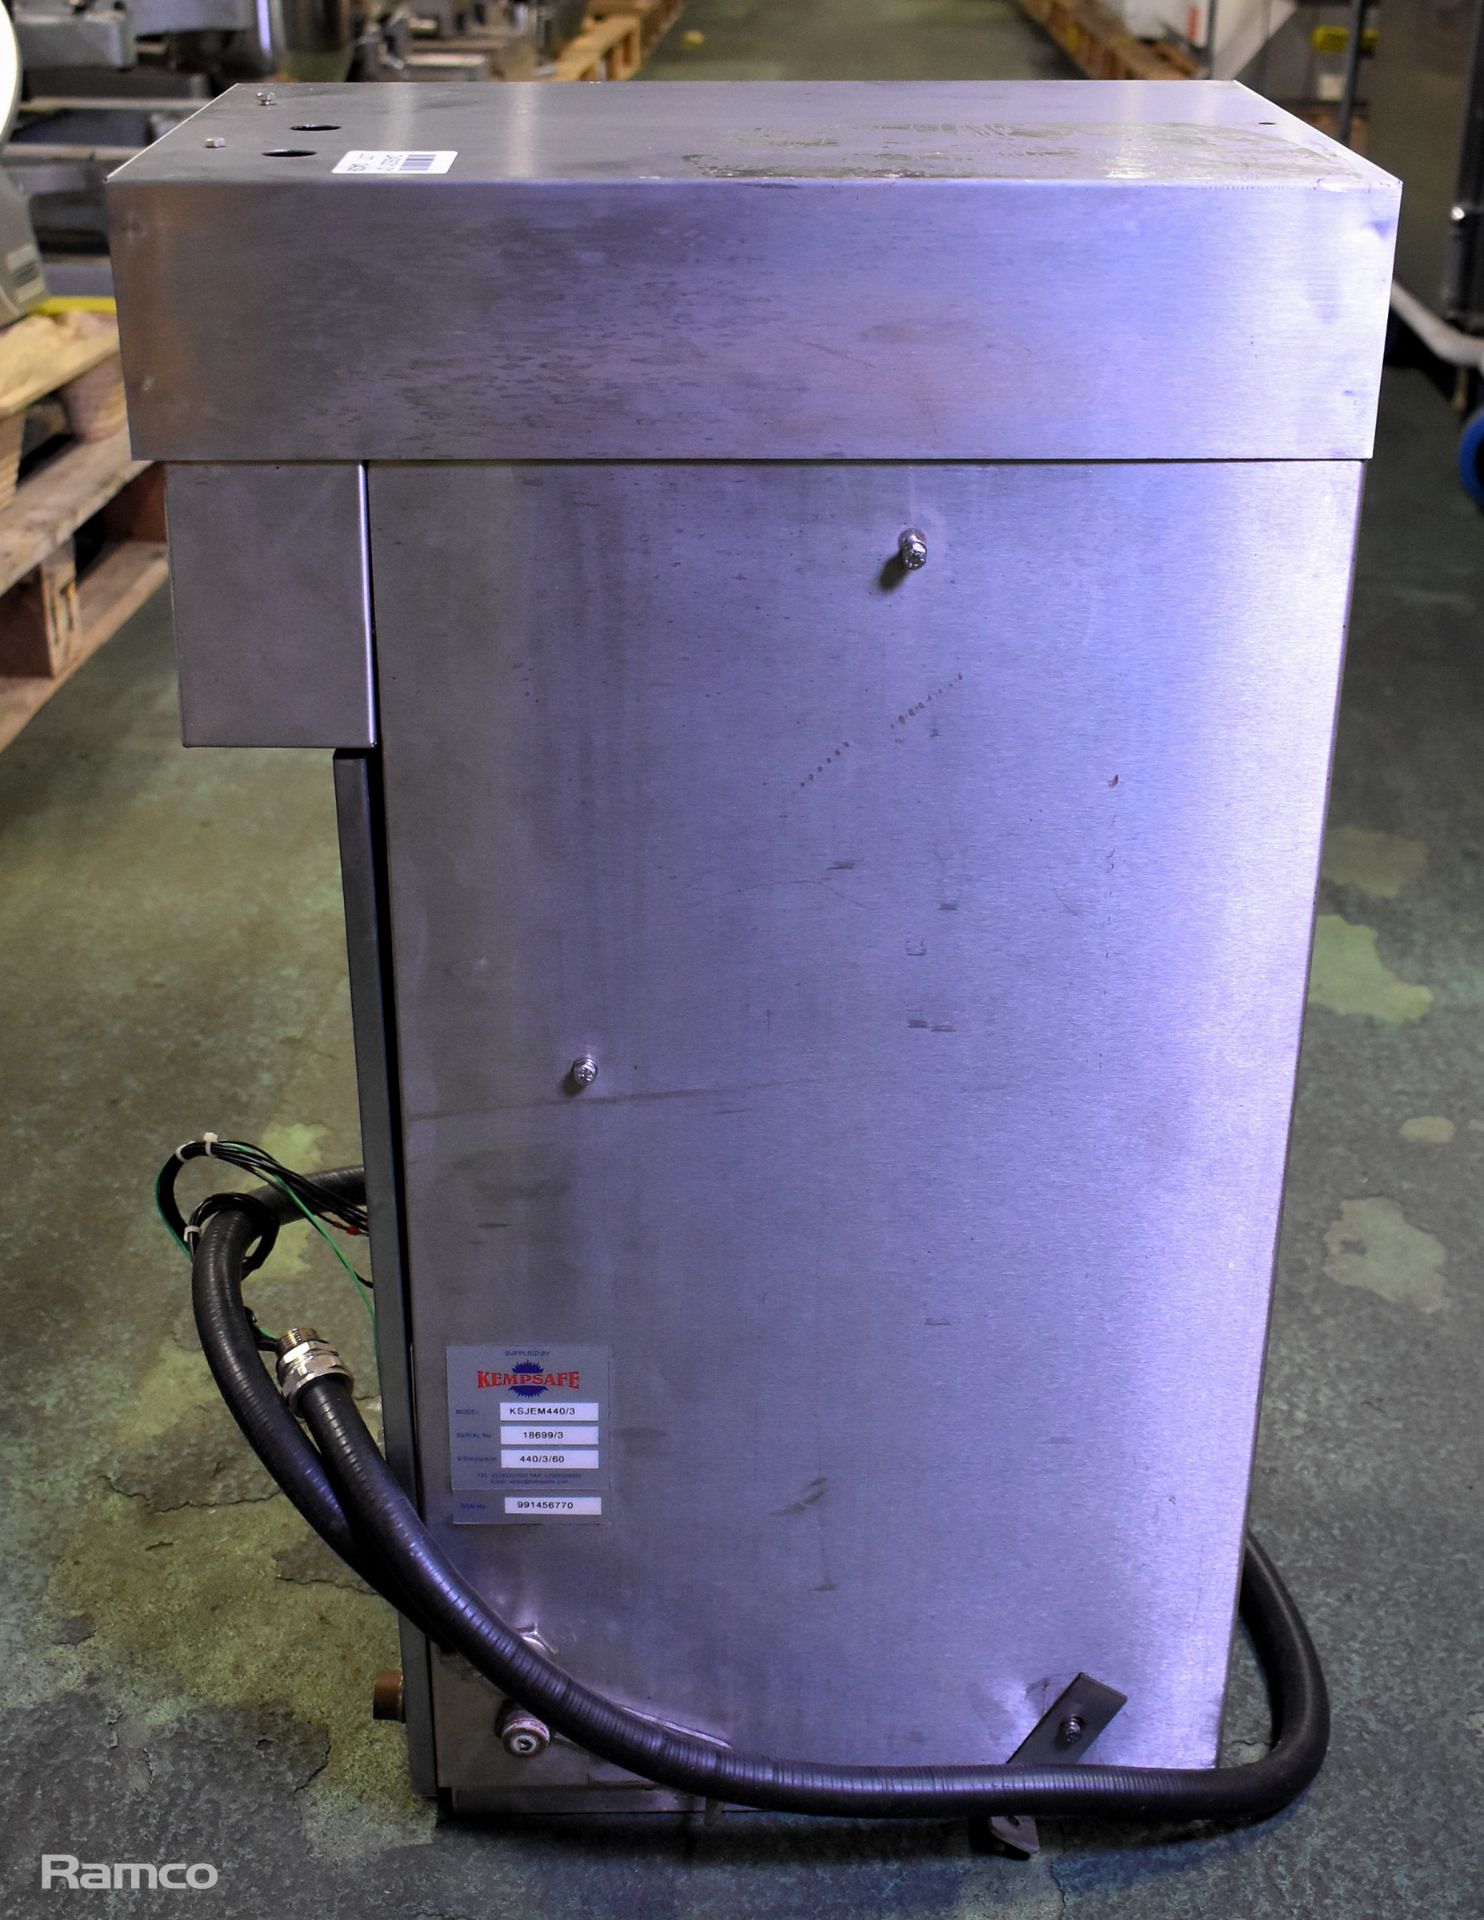 Kempsafe KSJEM440/3 stainless steel continuous water boiler/heater - Missing tap - 440V - 3ph - 60Hz - Image 3 of 4